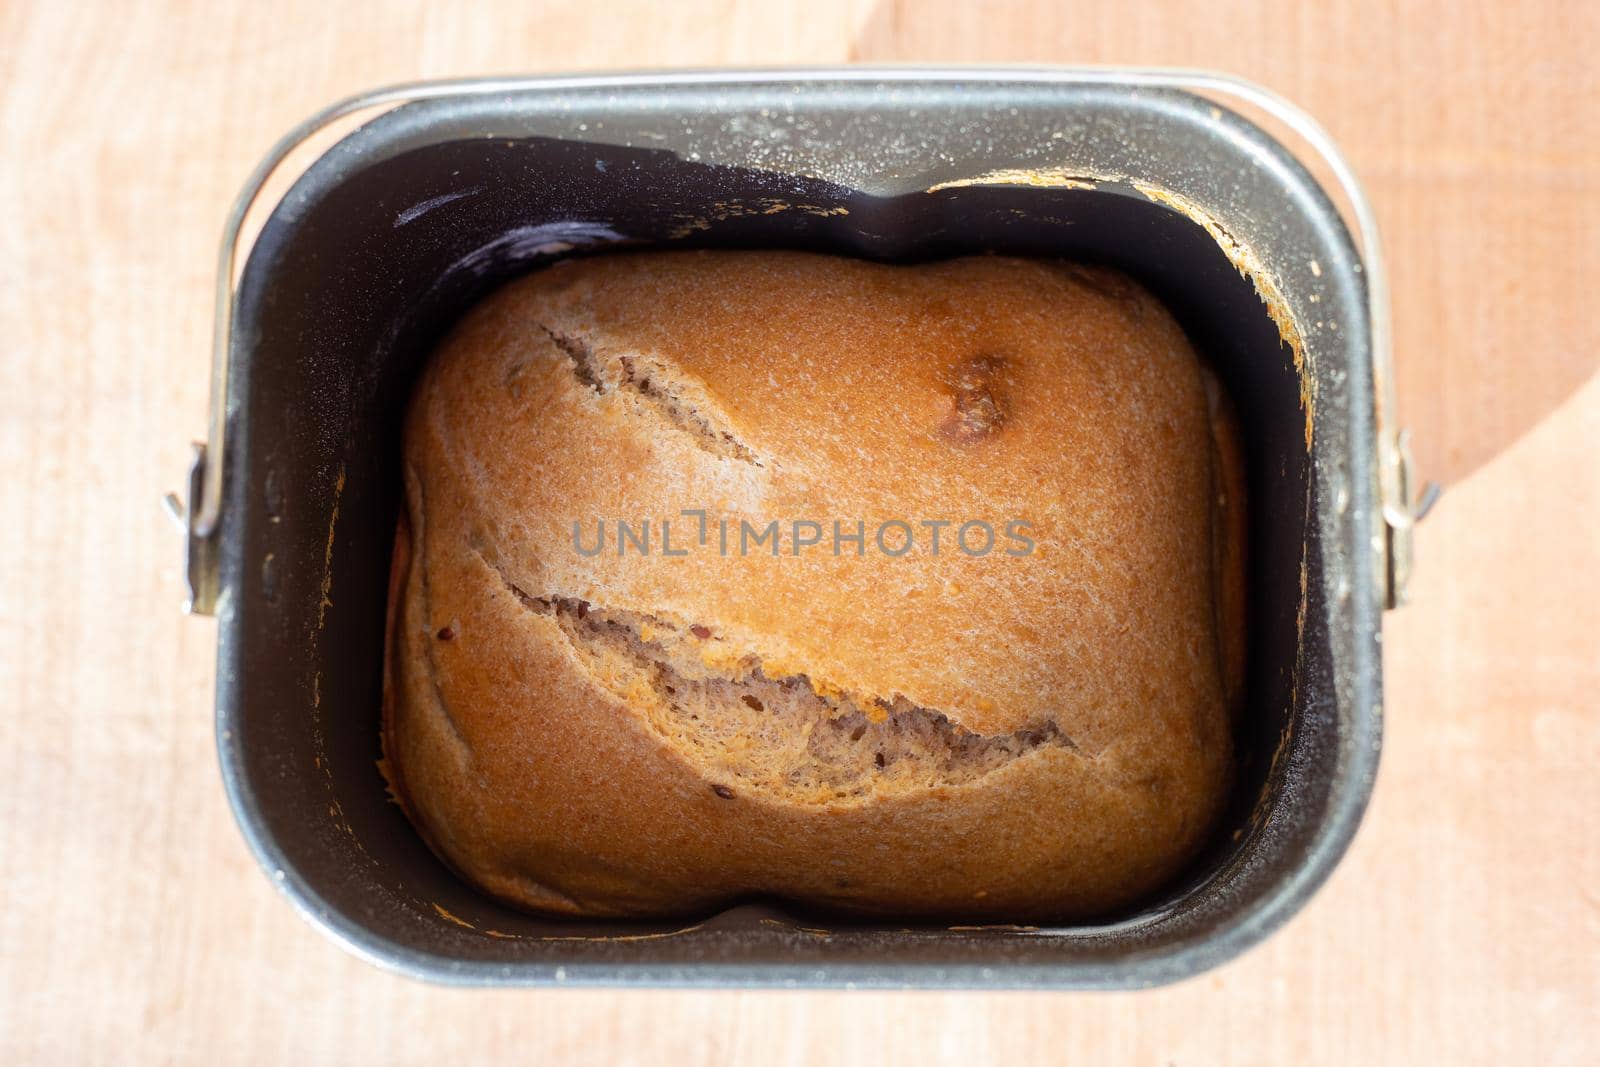 Homemade baked goods. A loaf of fresh bread in an electric bread maker by levnat09